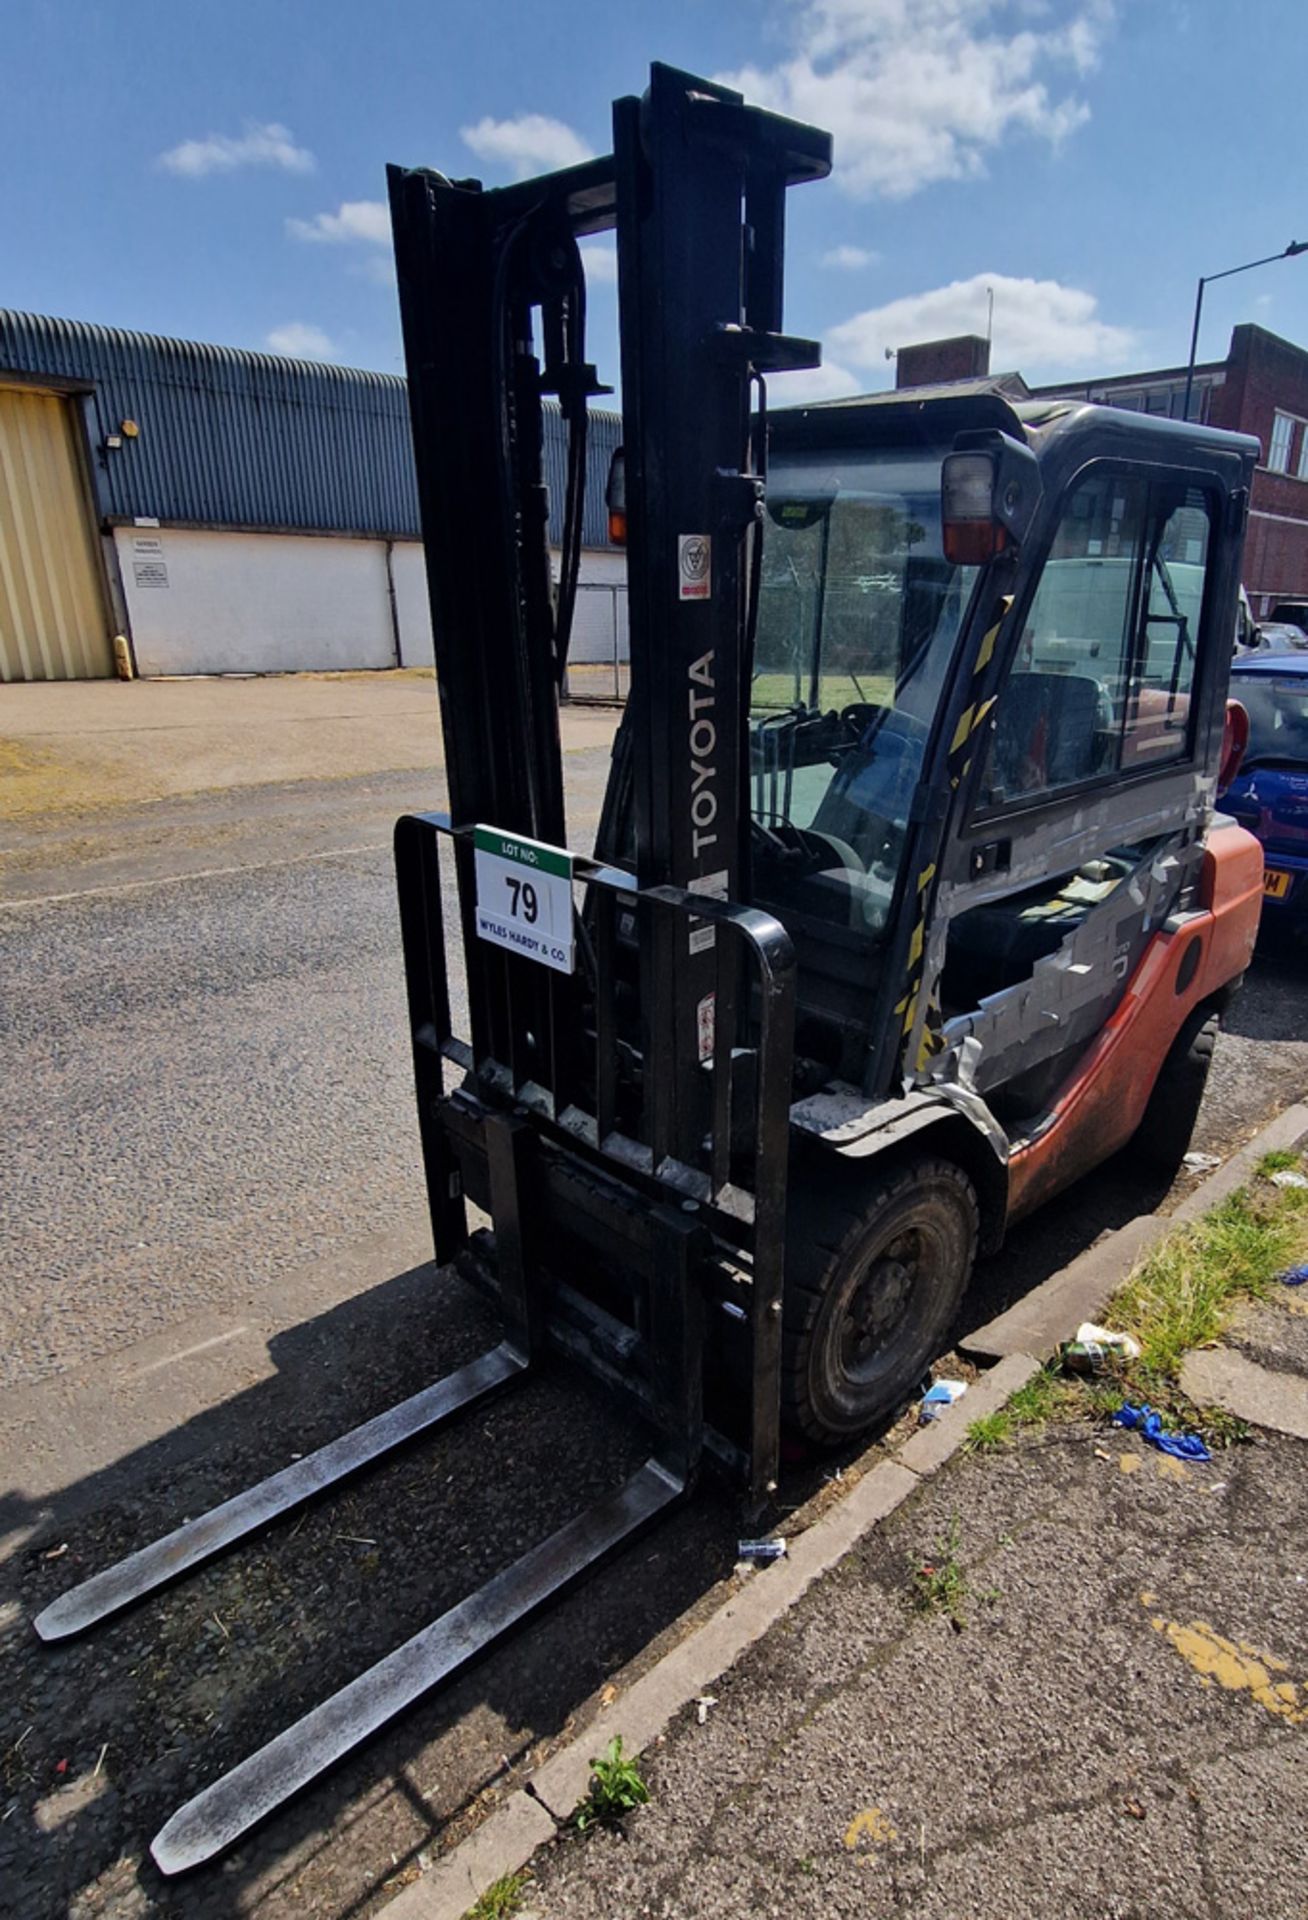 A TOYOTA Tonero 30 3000Kg capacity LPG Powered Ride-On Counter-Balance Forklift Truck, Serial No.